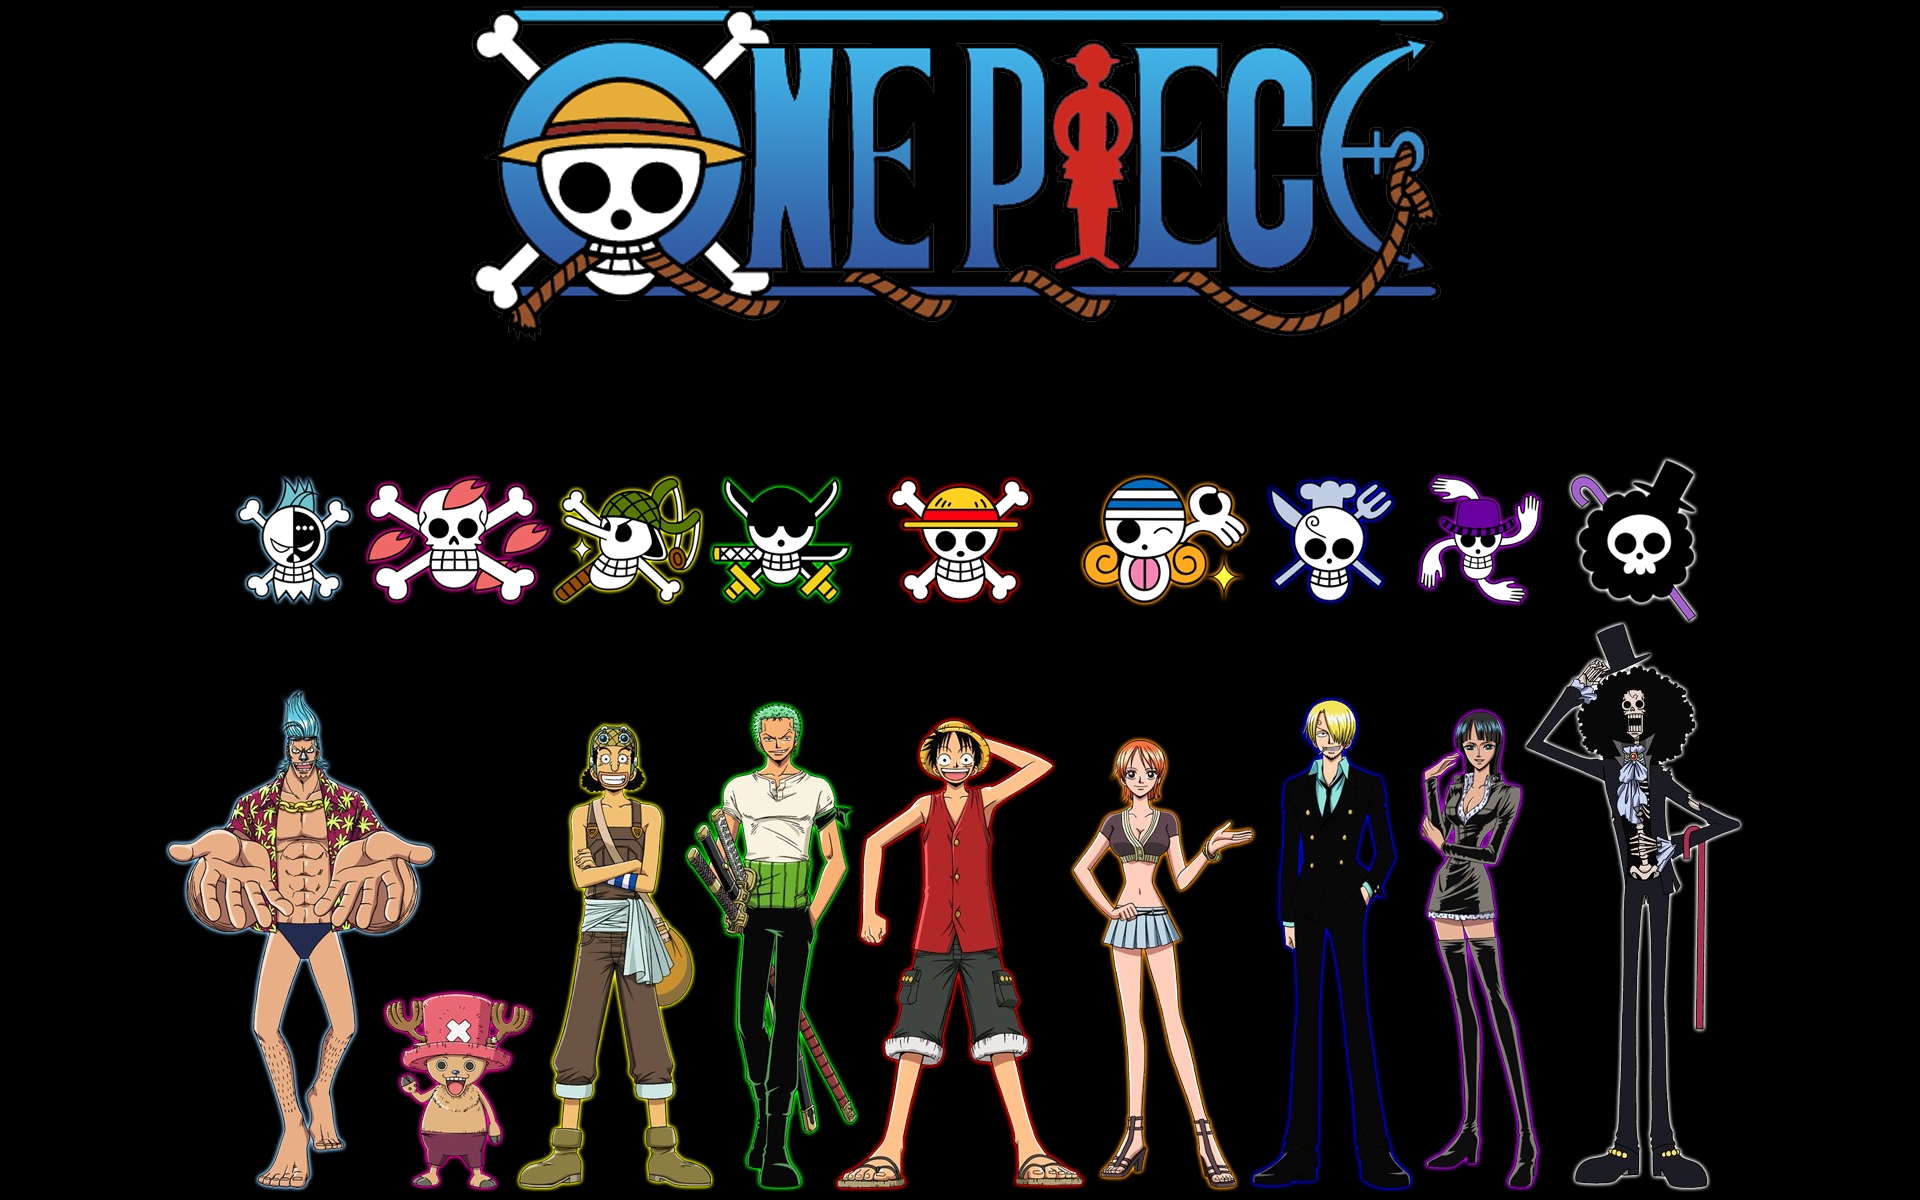 1303 one piece hd wallpapers | background images - wallpaper abyss